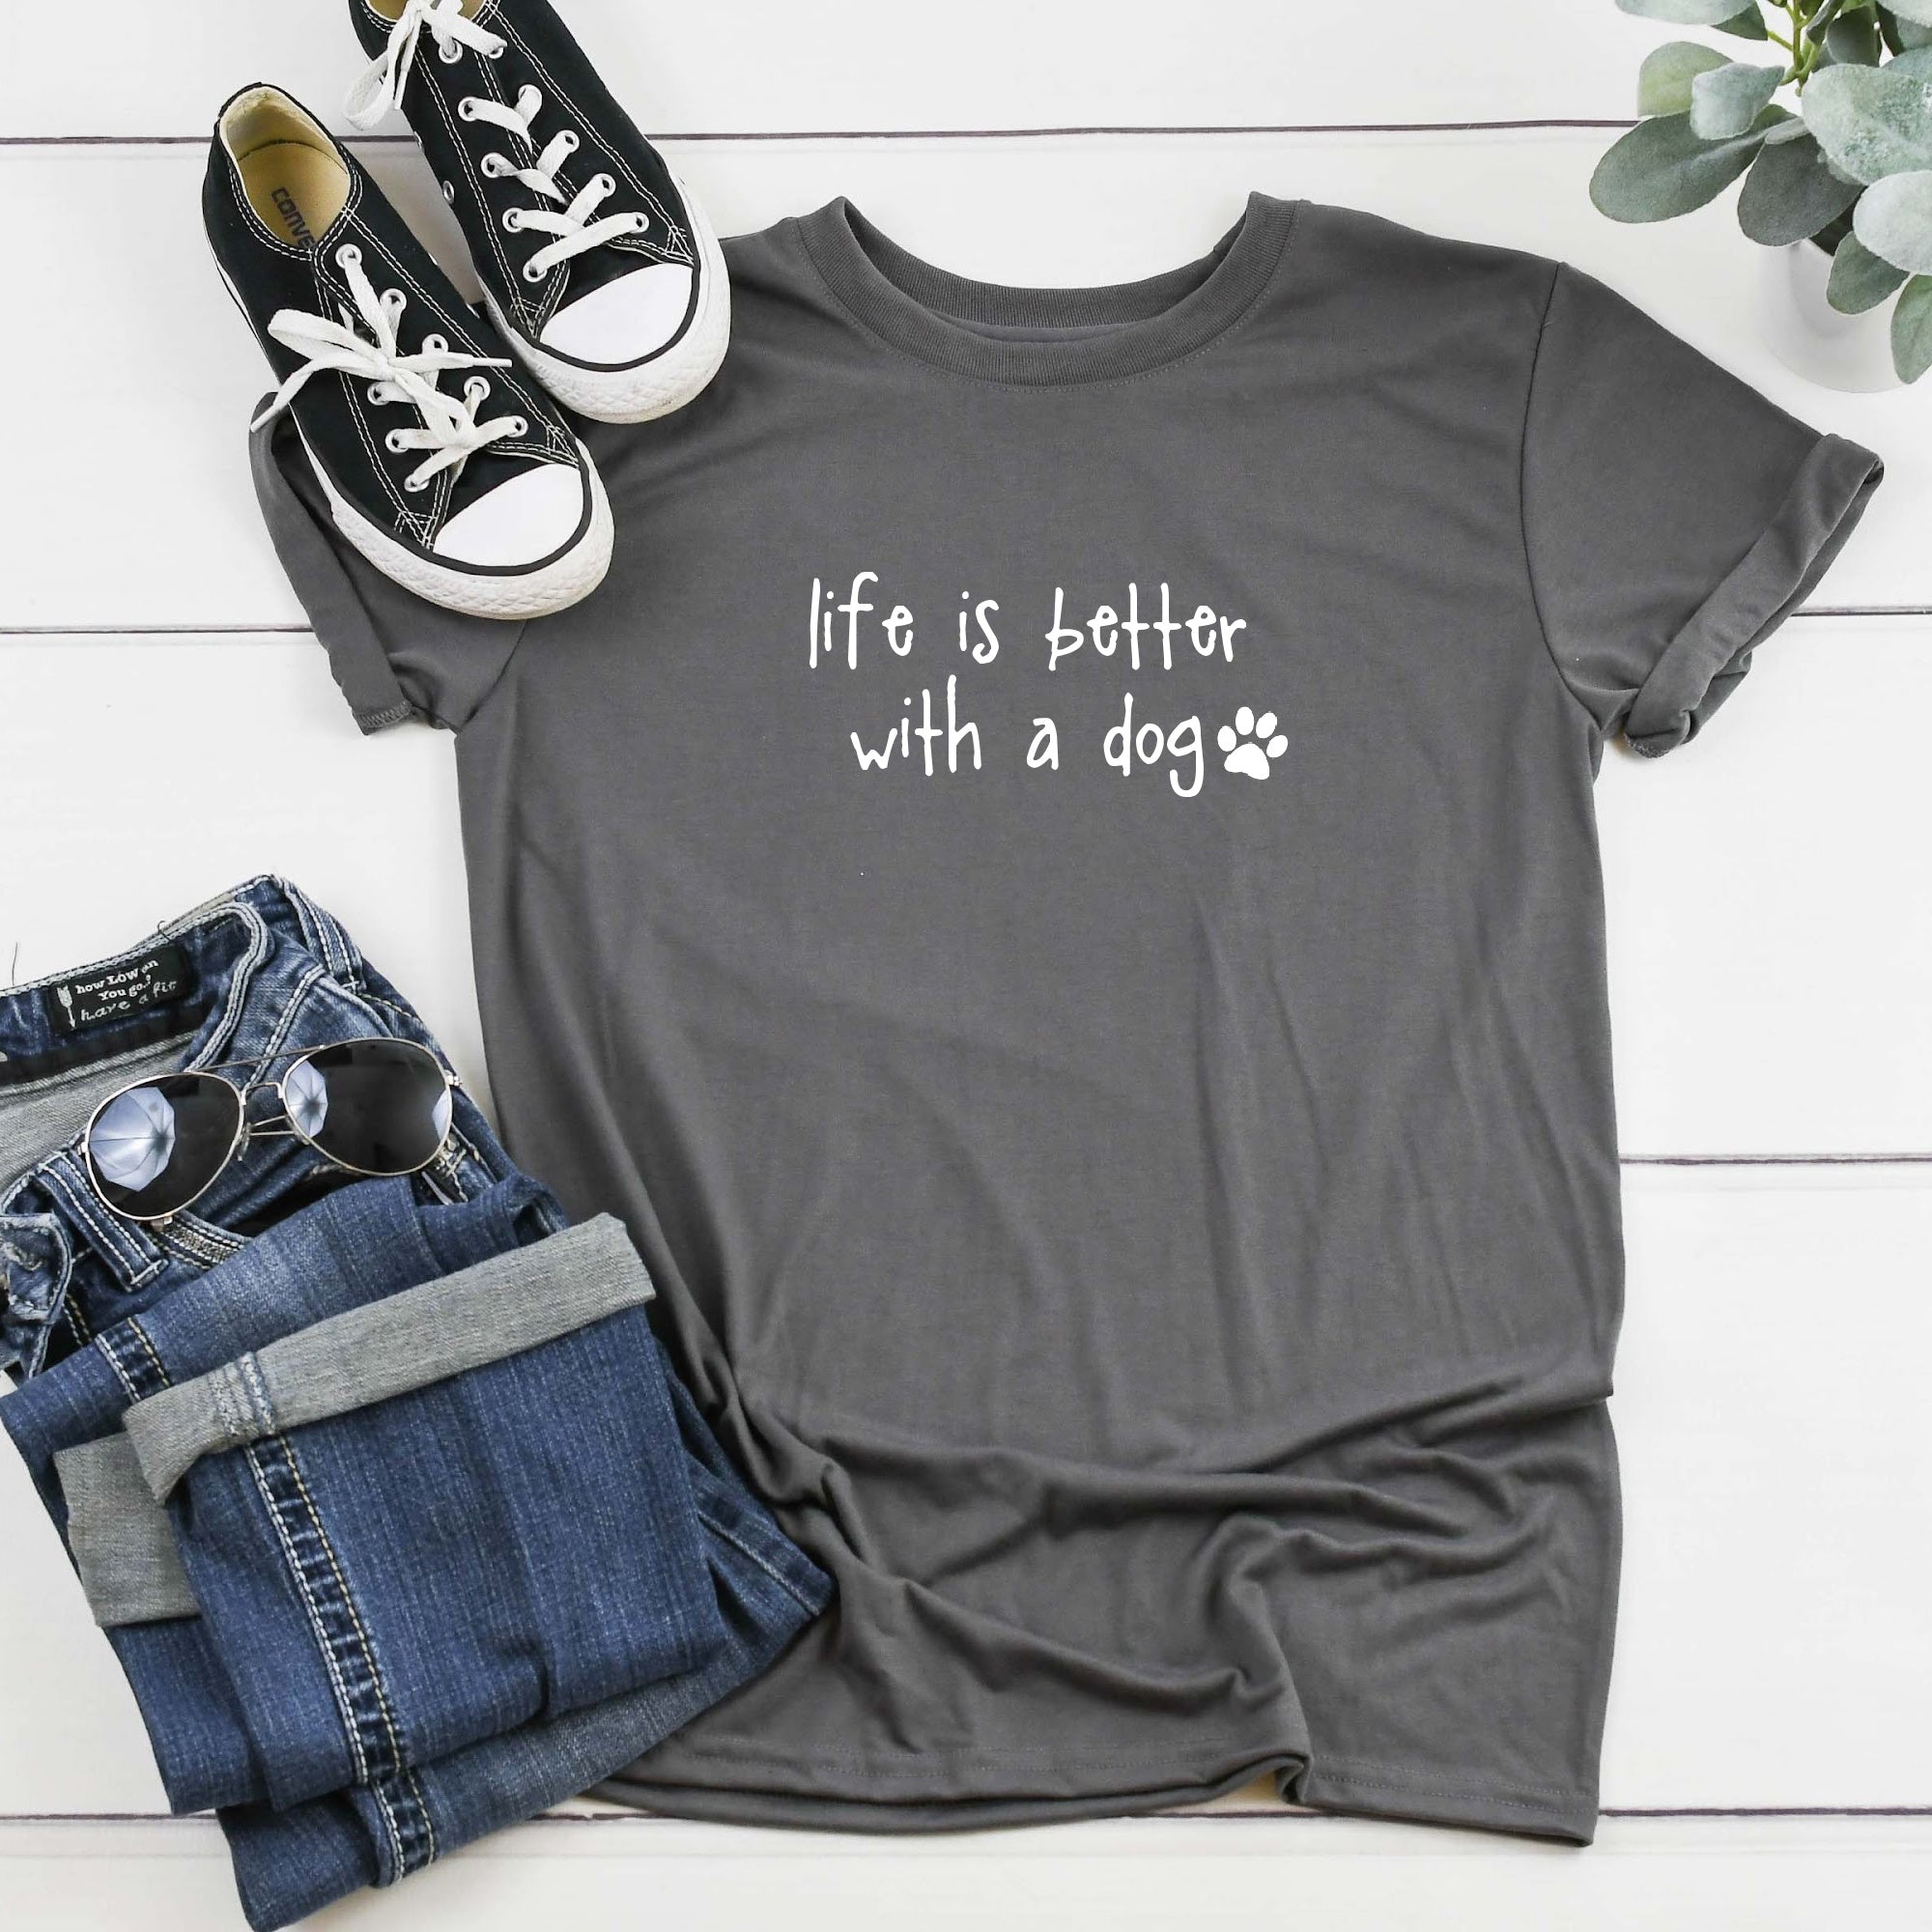 life is better with a dog charcoal t shirt